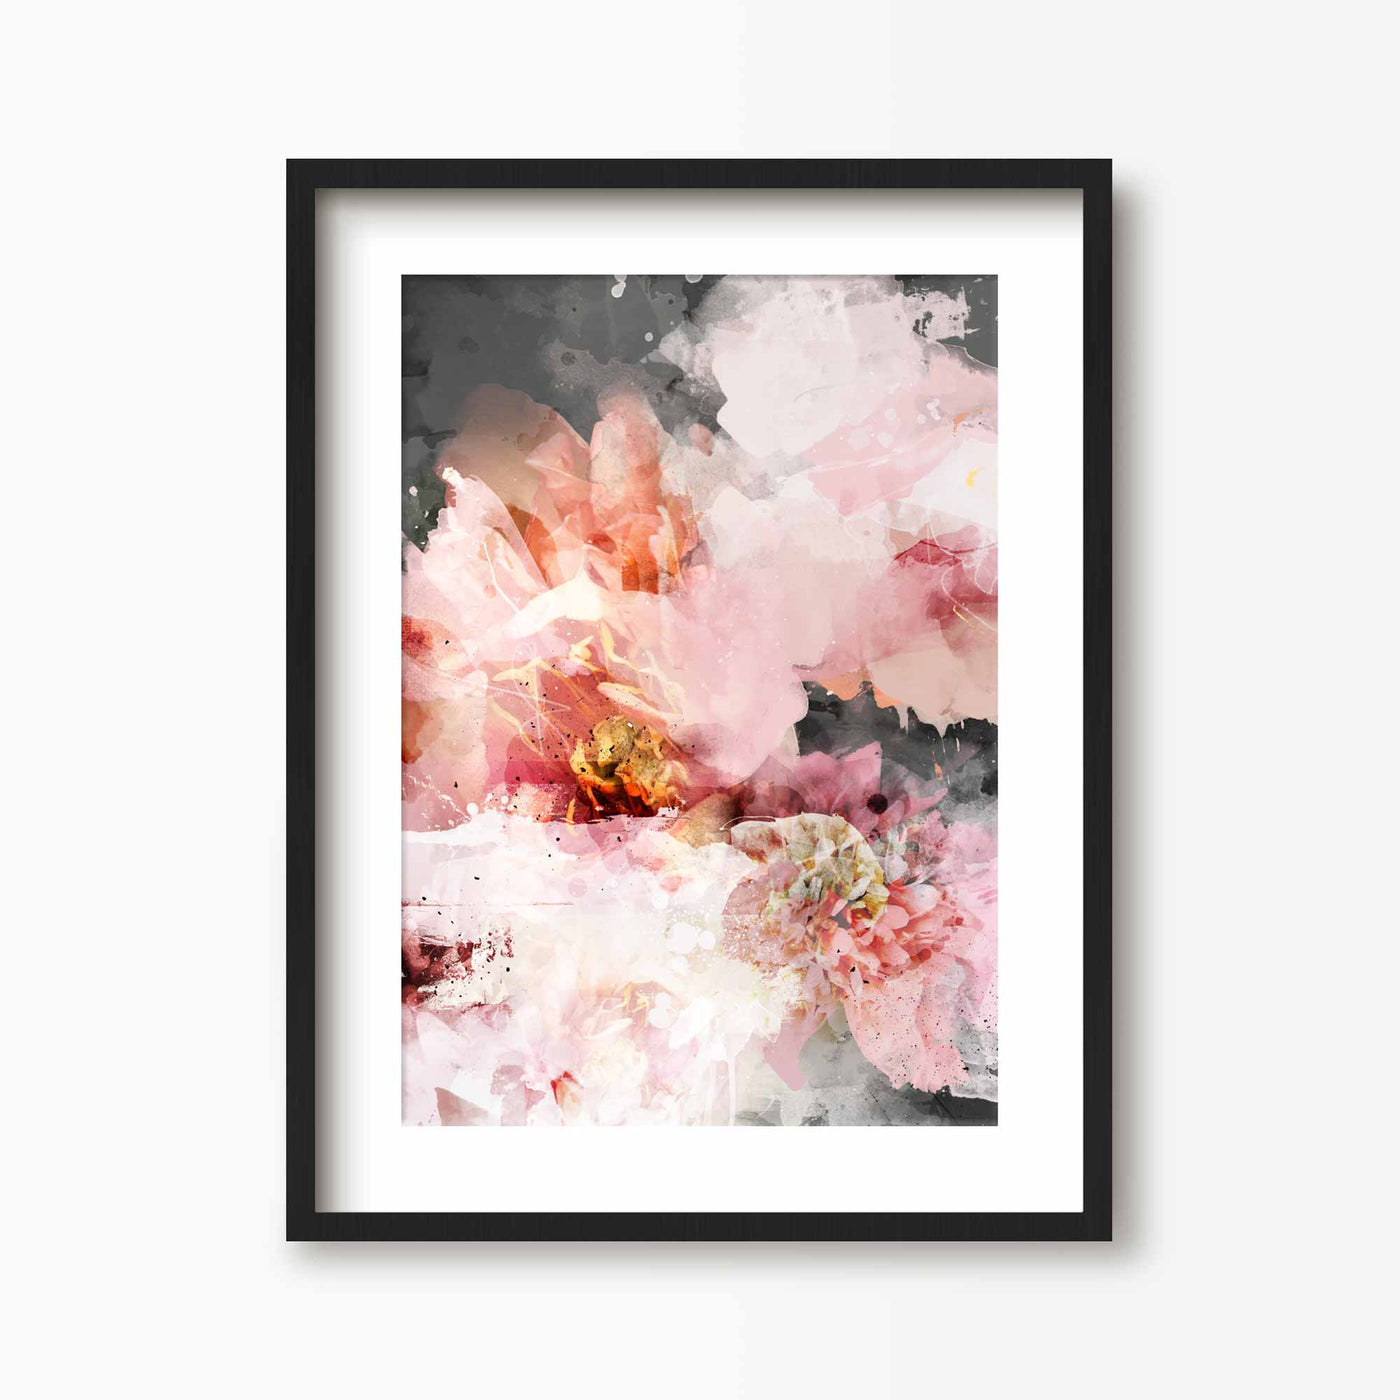 Green Lili 30x40cm (12x16") / Black Frame + Mount Pink Blooms Abstract Floral Print